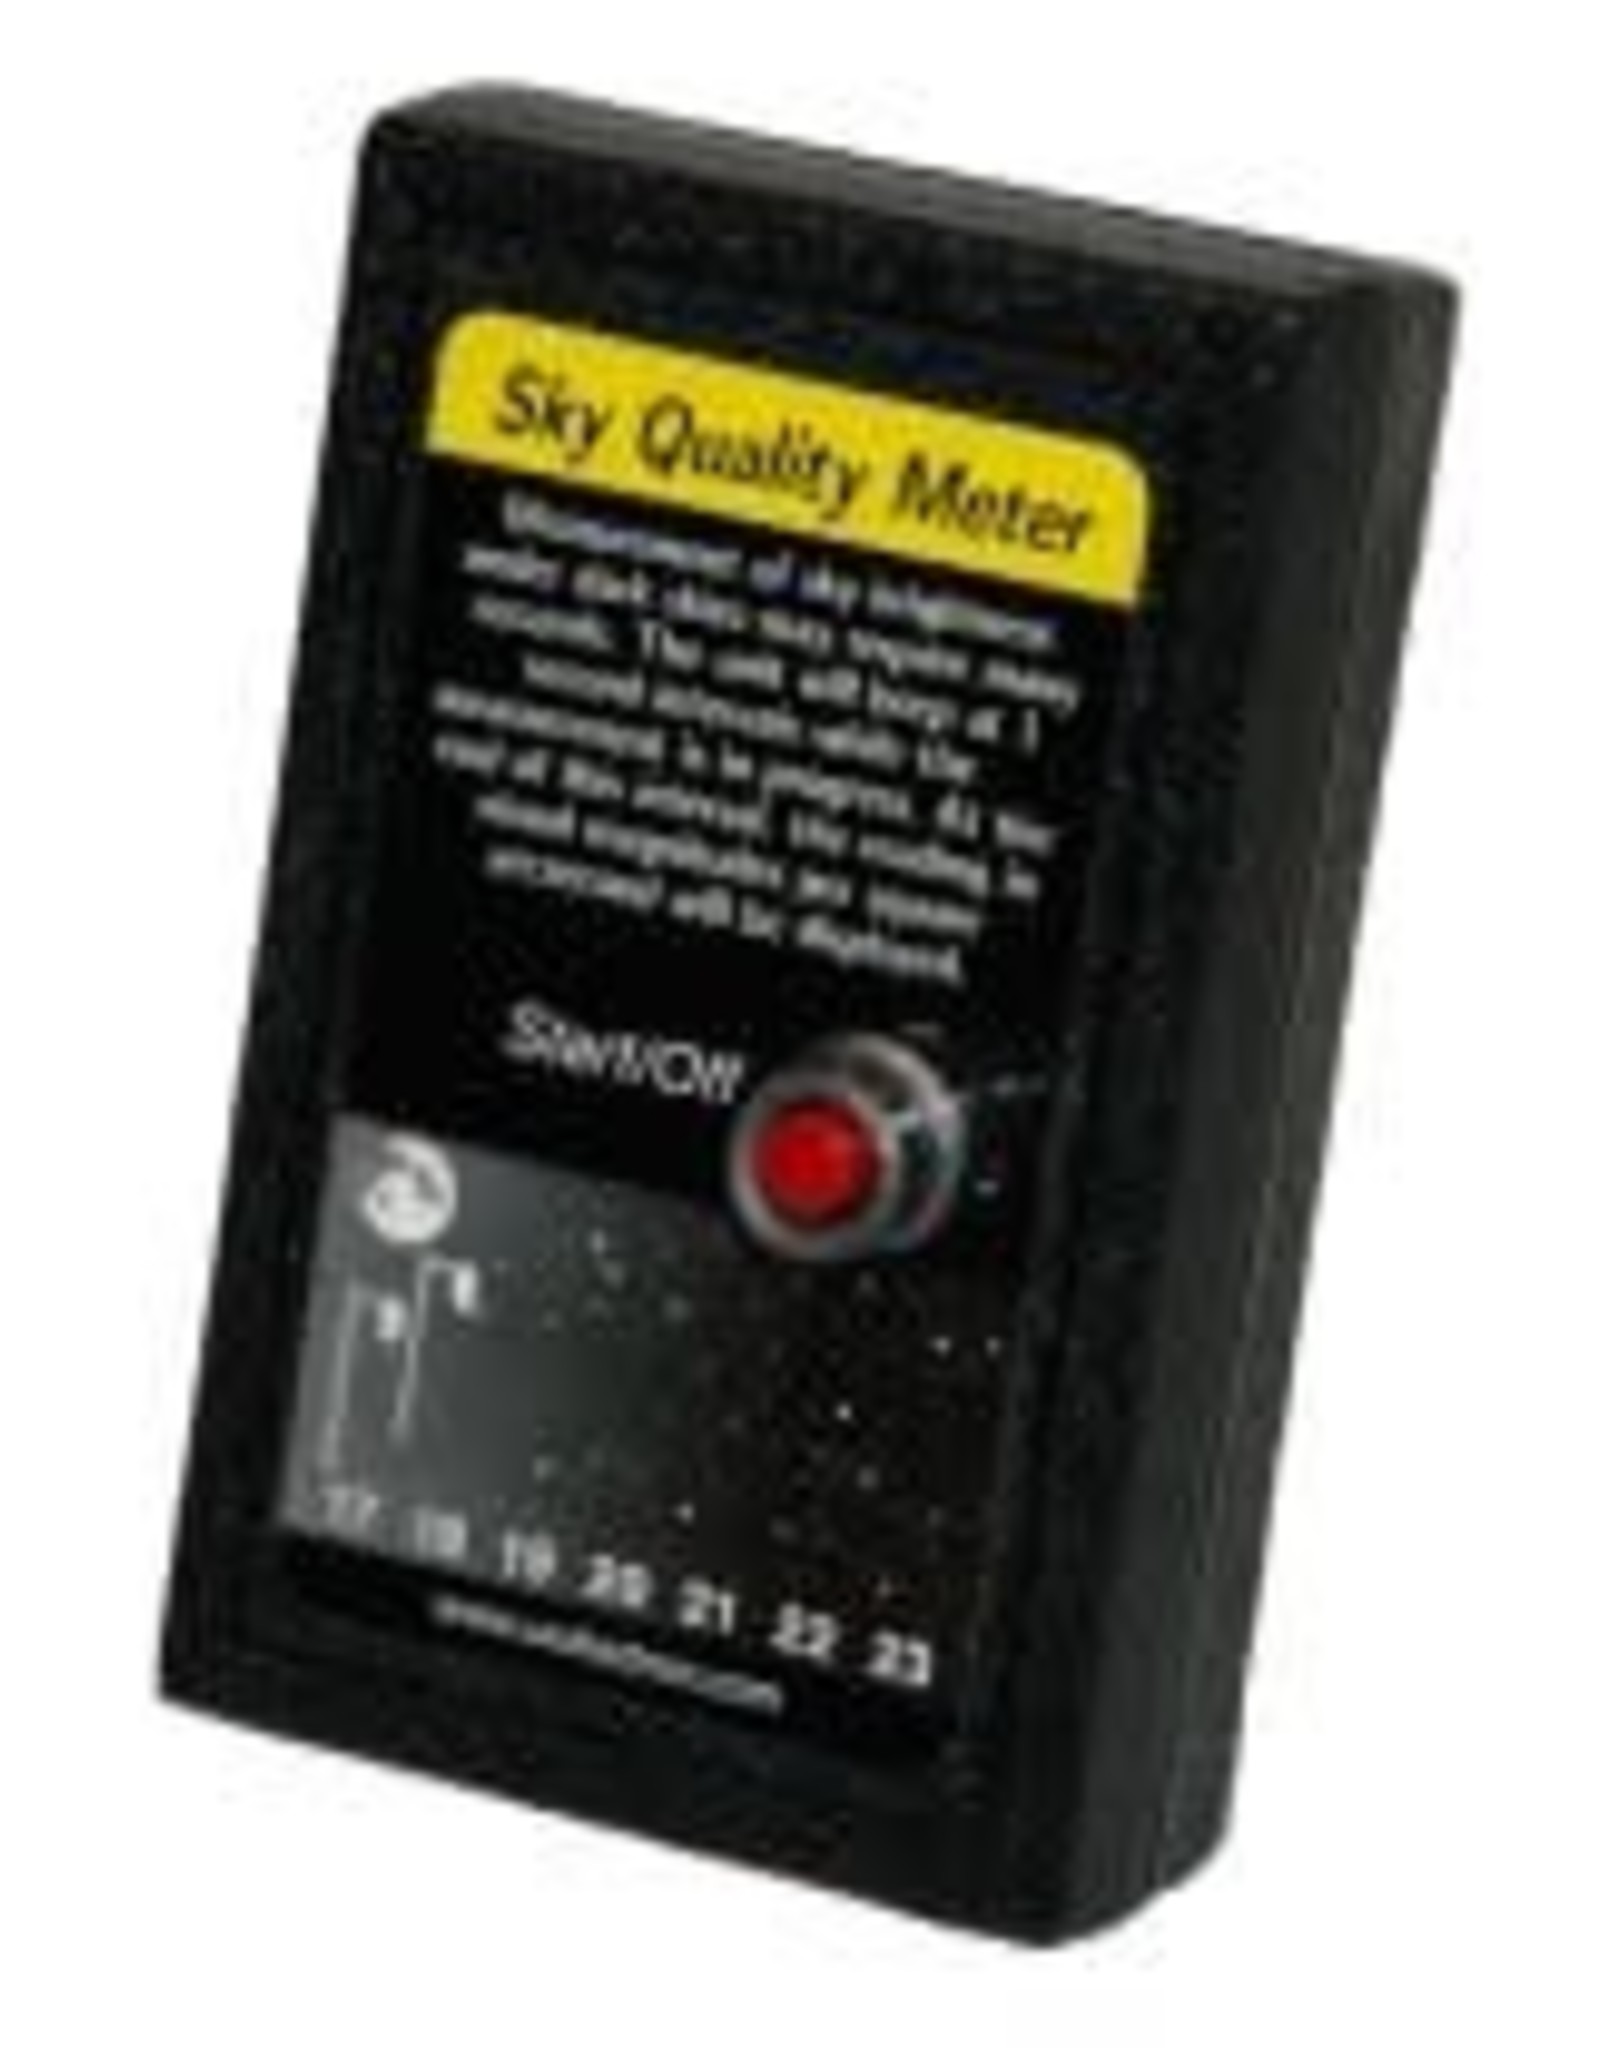 Unihedron Sky Quality Meter-SQM